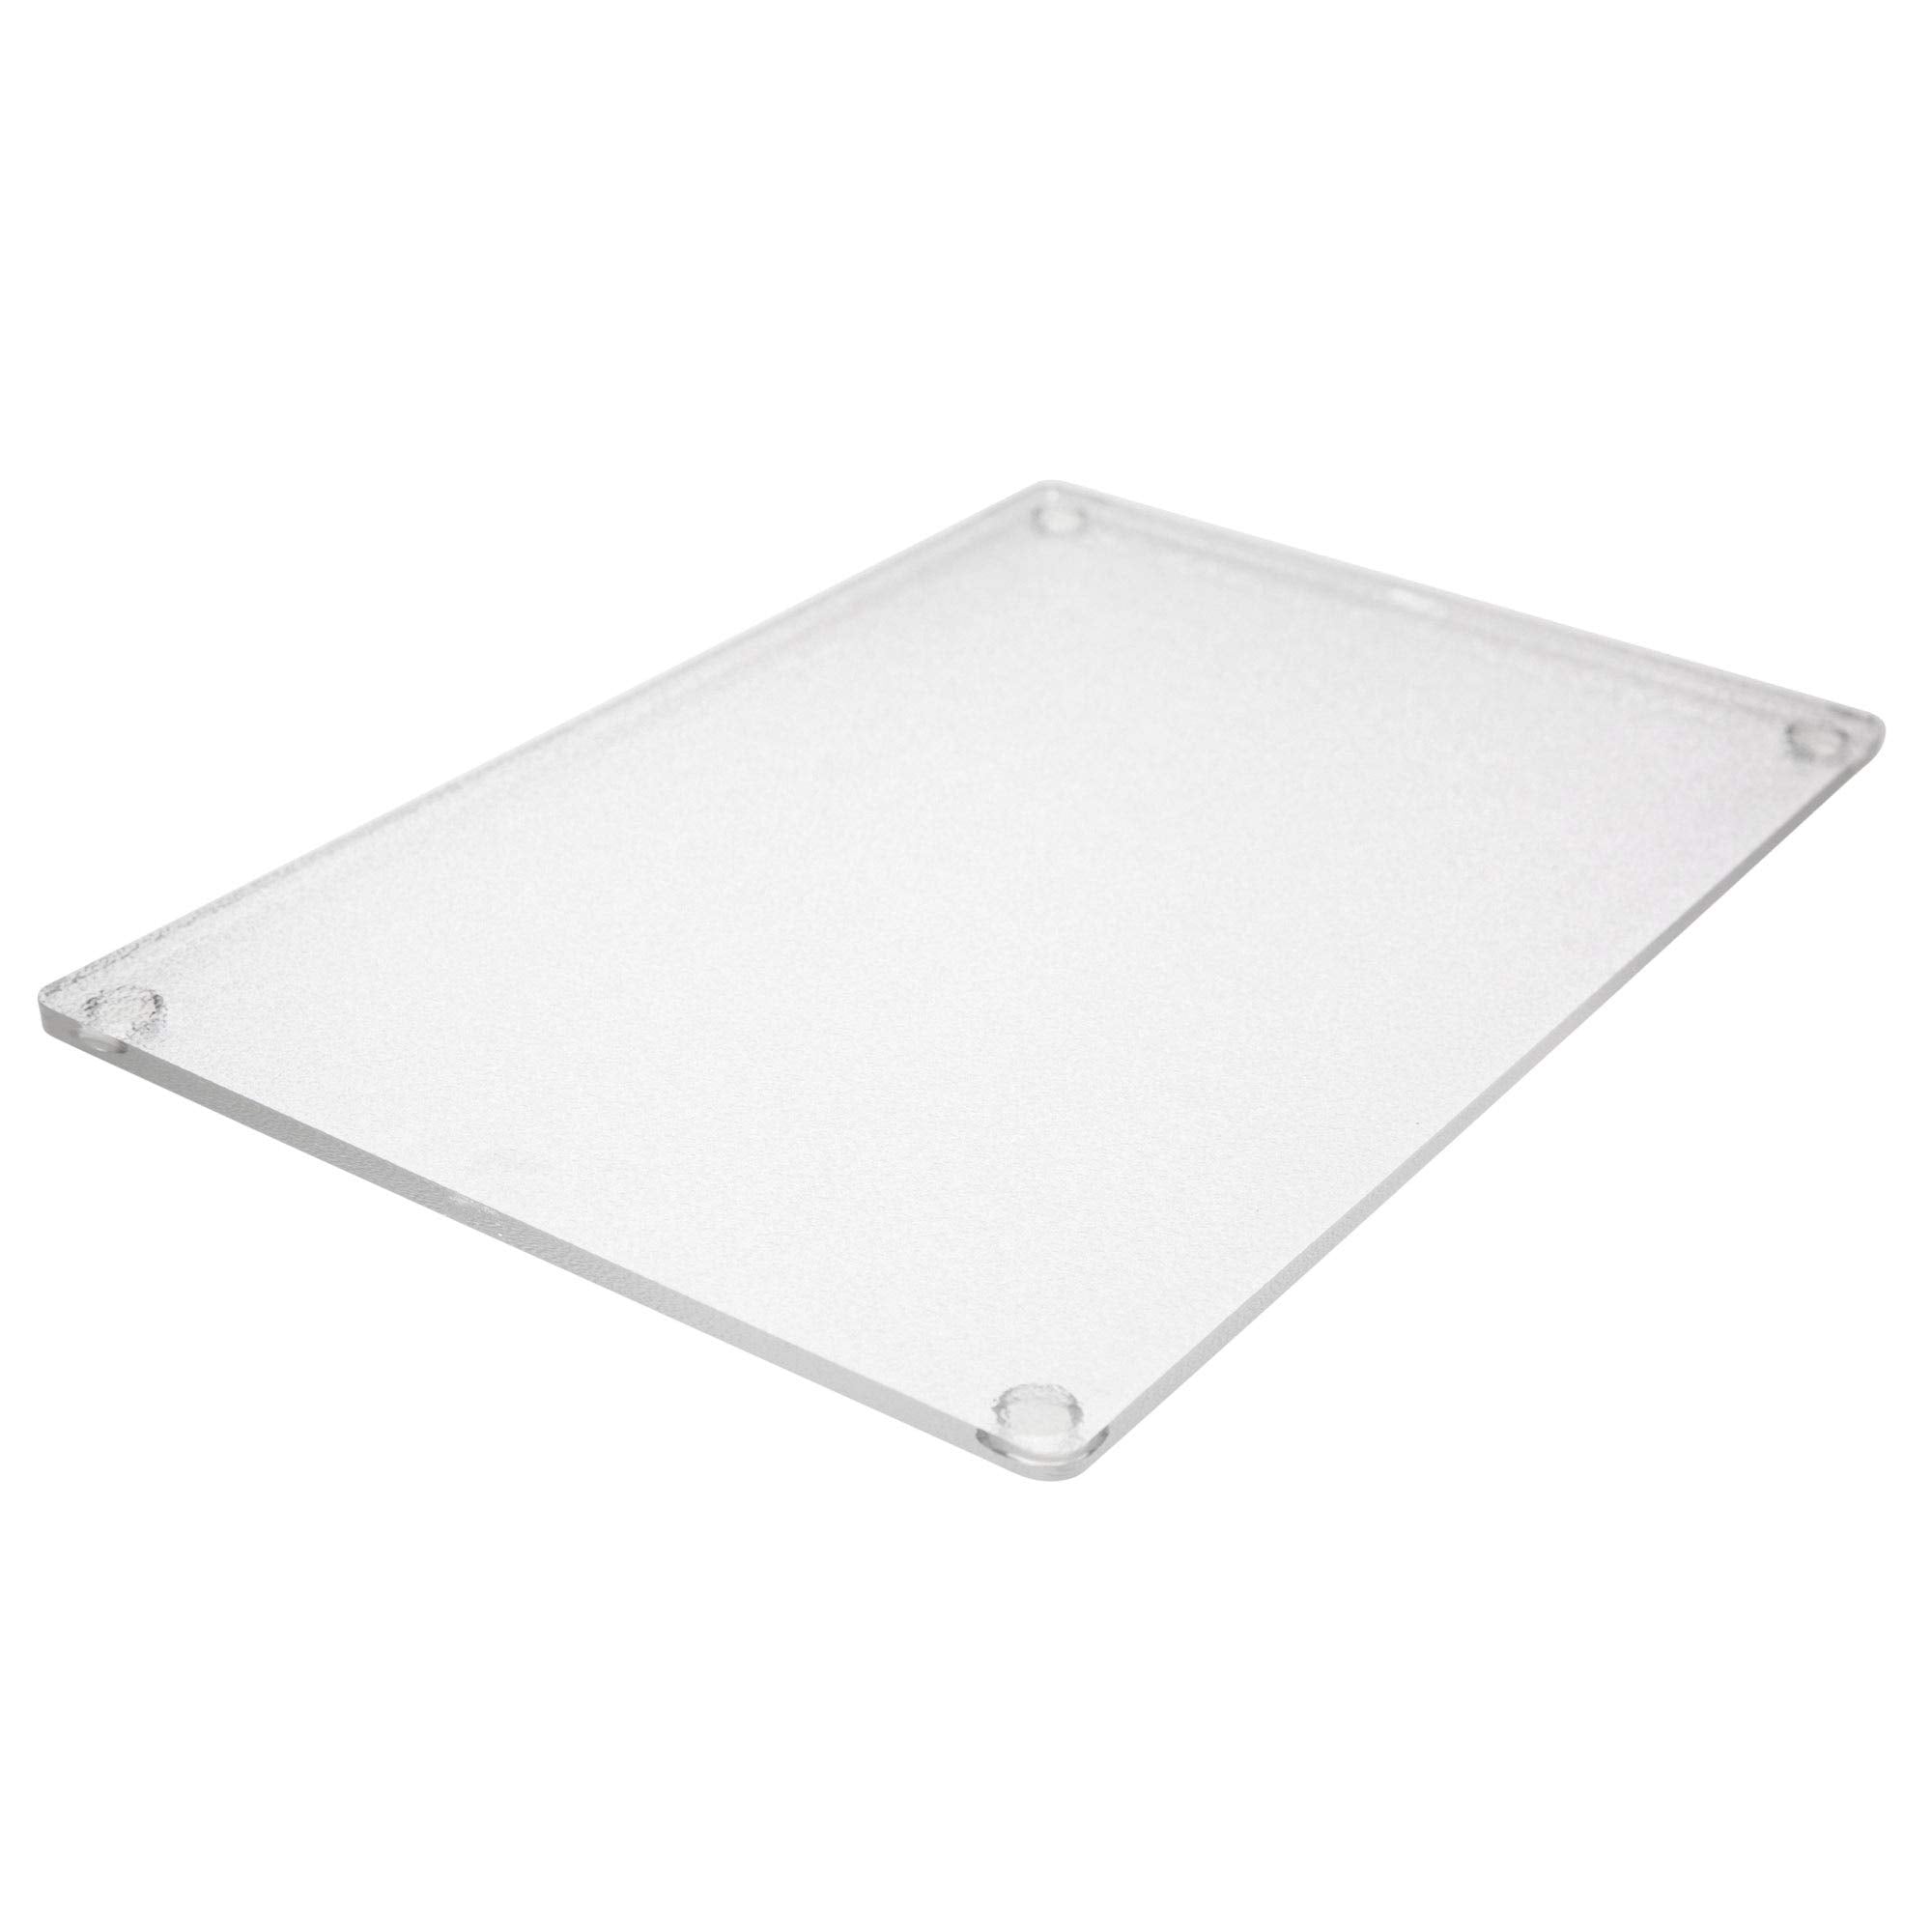 Large Acrylic Cutting Board - 16x10 Inch with Rubber Feet